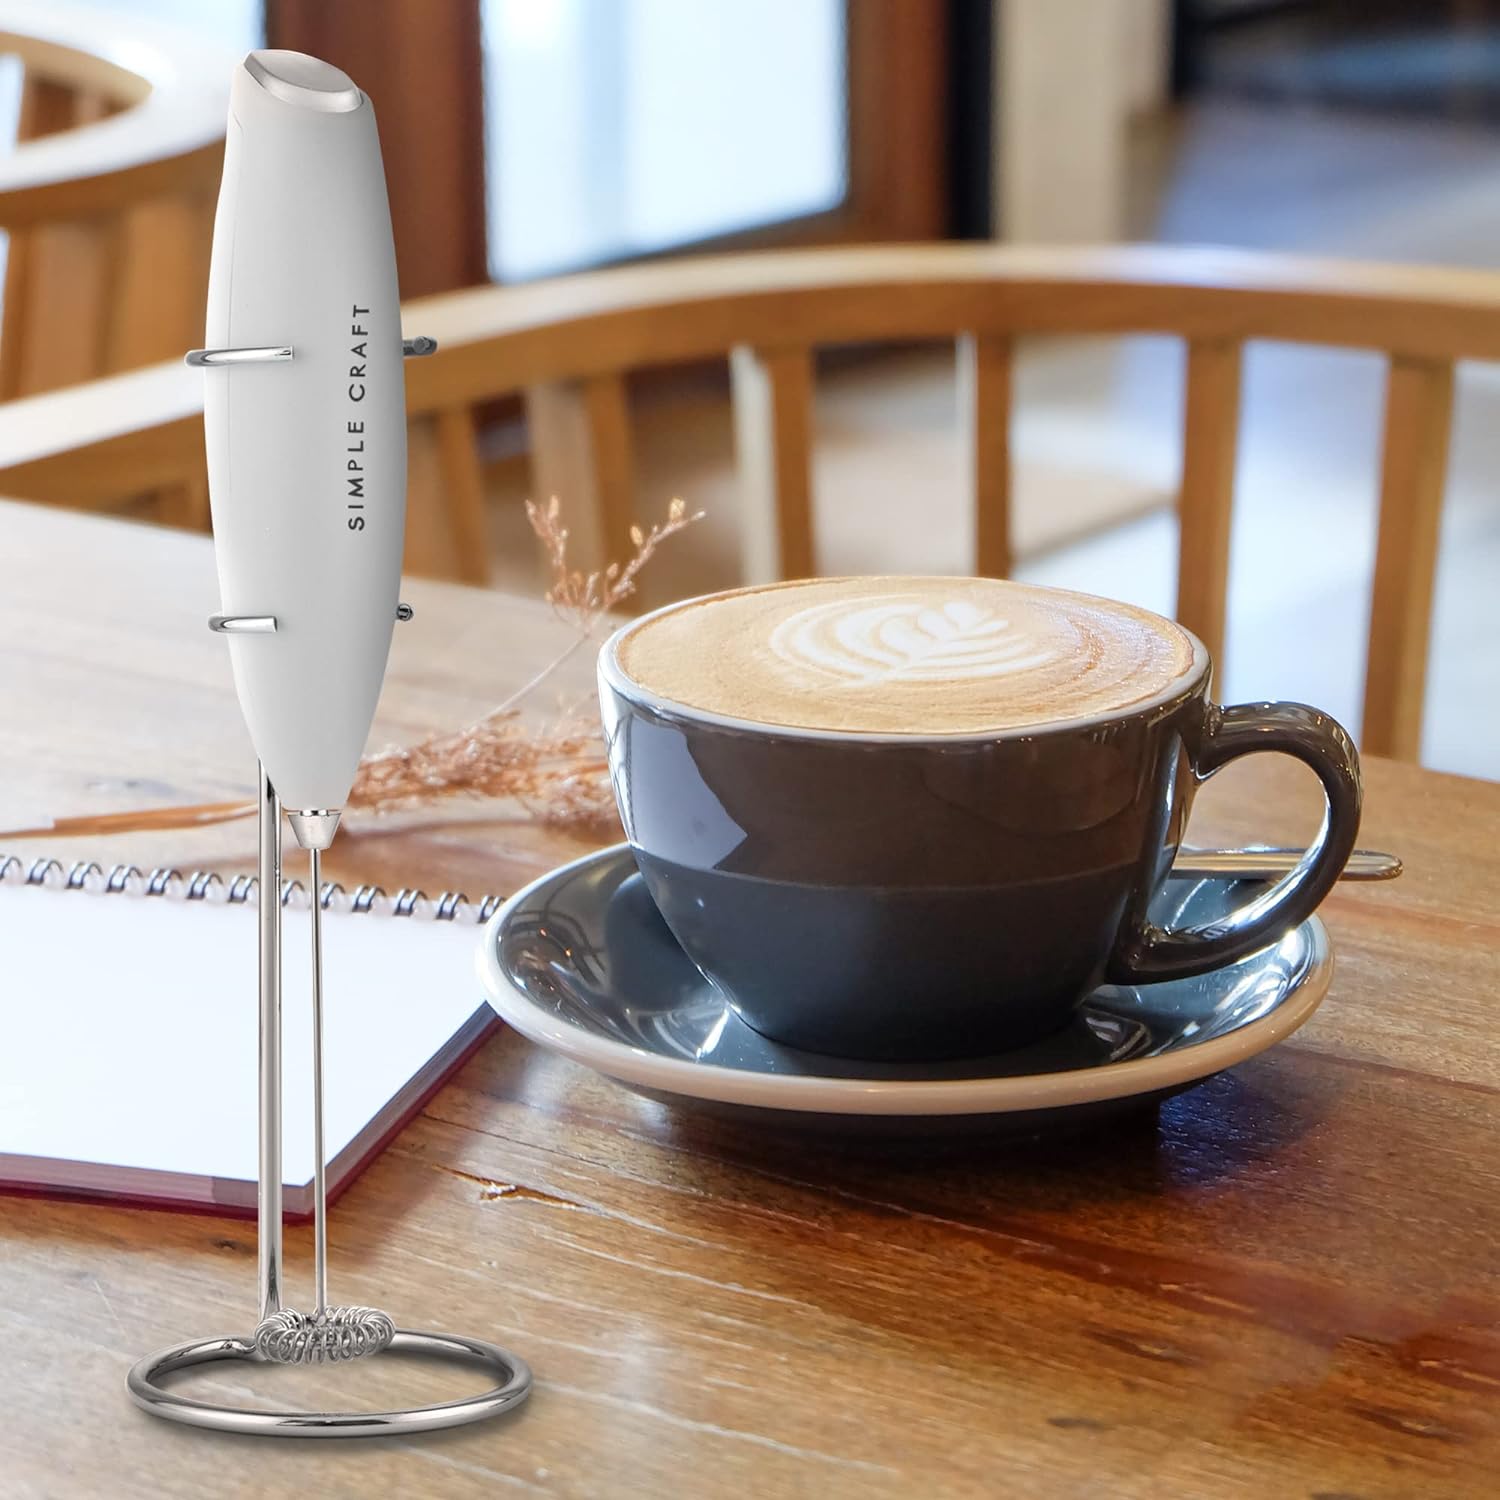 Zulay Powerful Milk Frother for Coffee with Powerful Motor - Frother  Handheld Electric Whisk, Milk Foamer, Mini Mixer, Handheld Frother for  Matcha, No